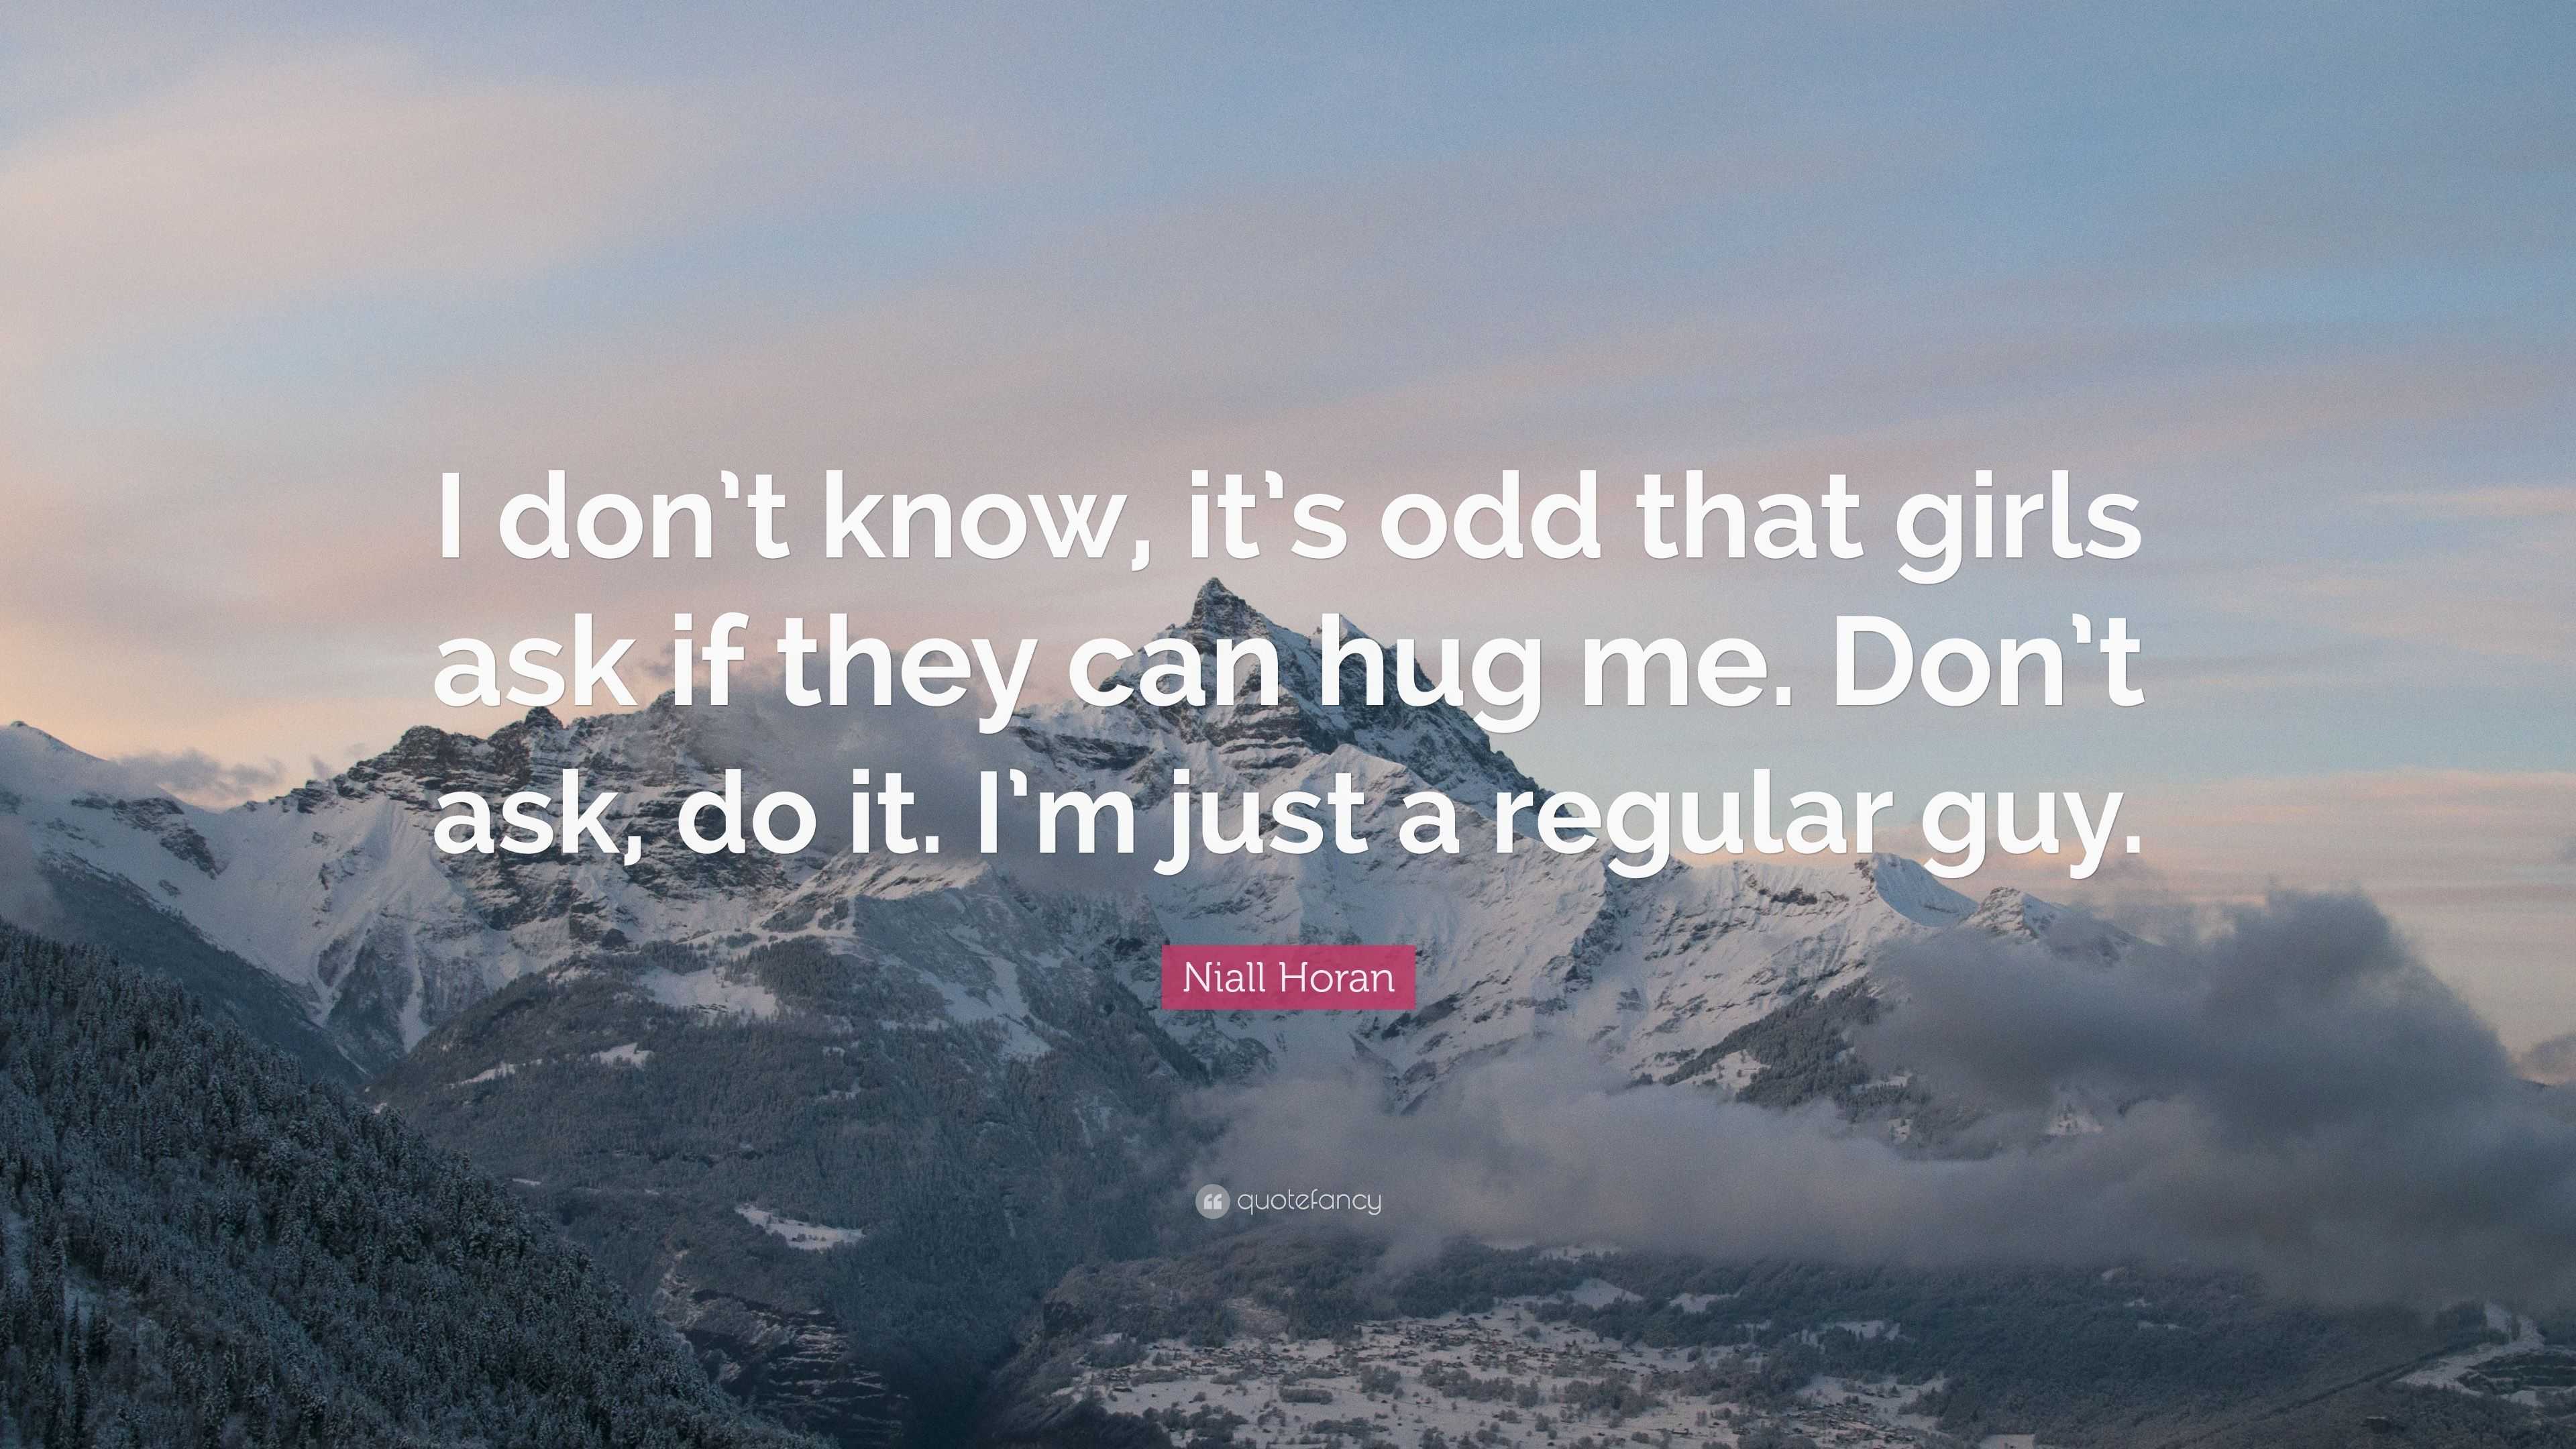 Niall Horan Quote: “I don’t know, it’s odd that girls ask if they can ...